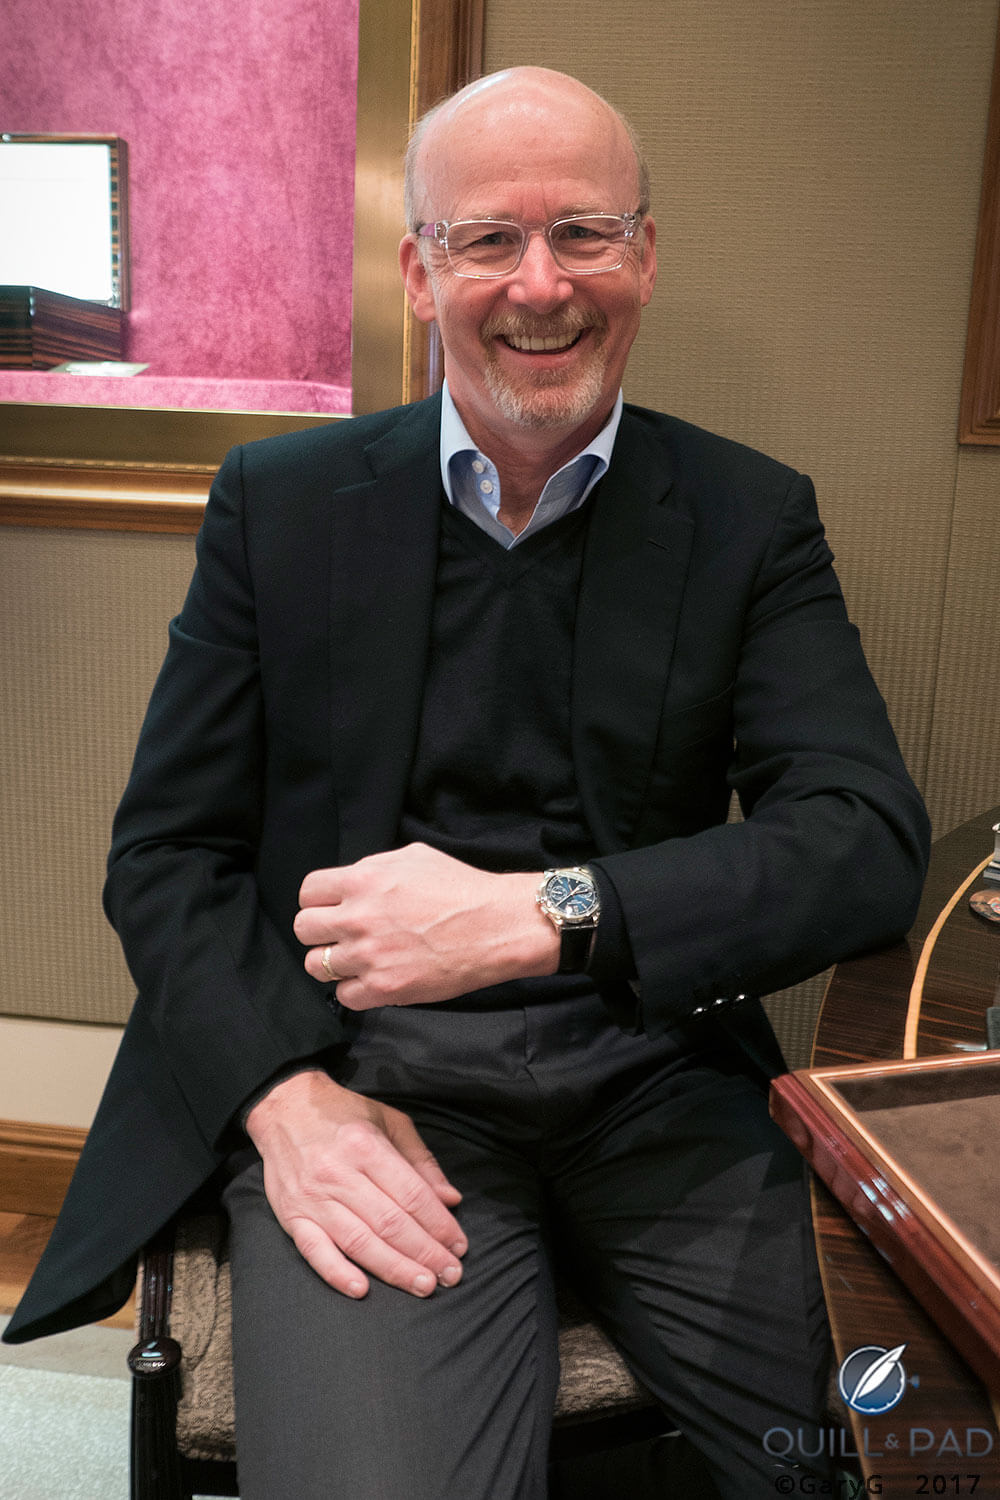 Sitting in “The Chair” with a newly delivered watch at the Patek Philippe Geneva Salon